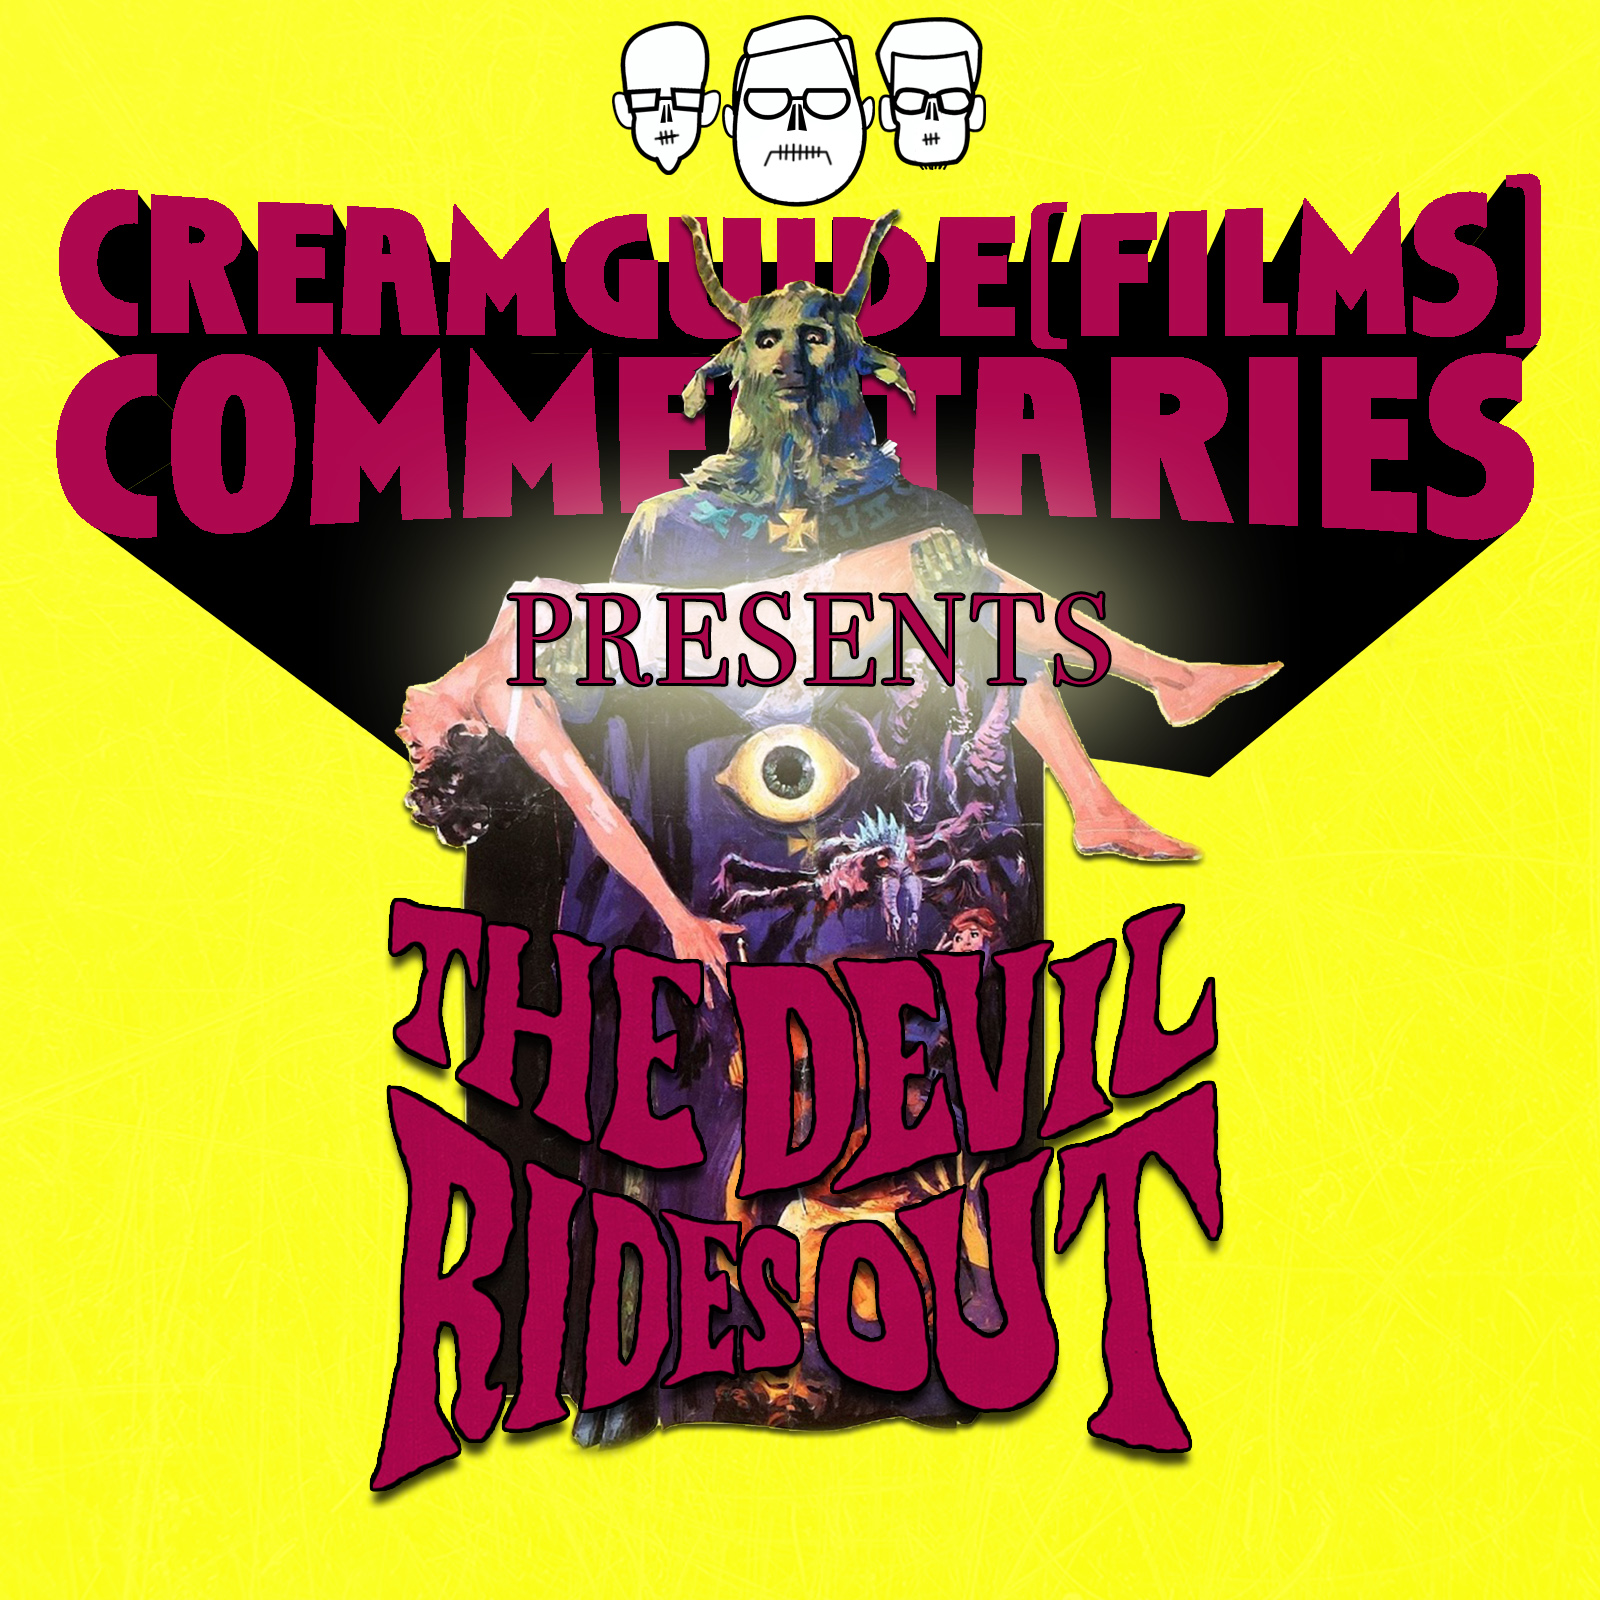 Creamguide (Films) Commentaries: The Devil Rides Out